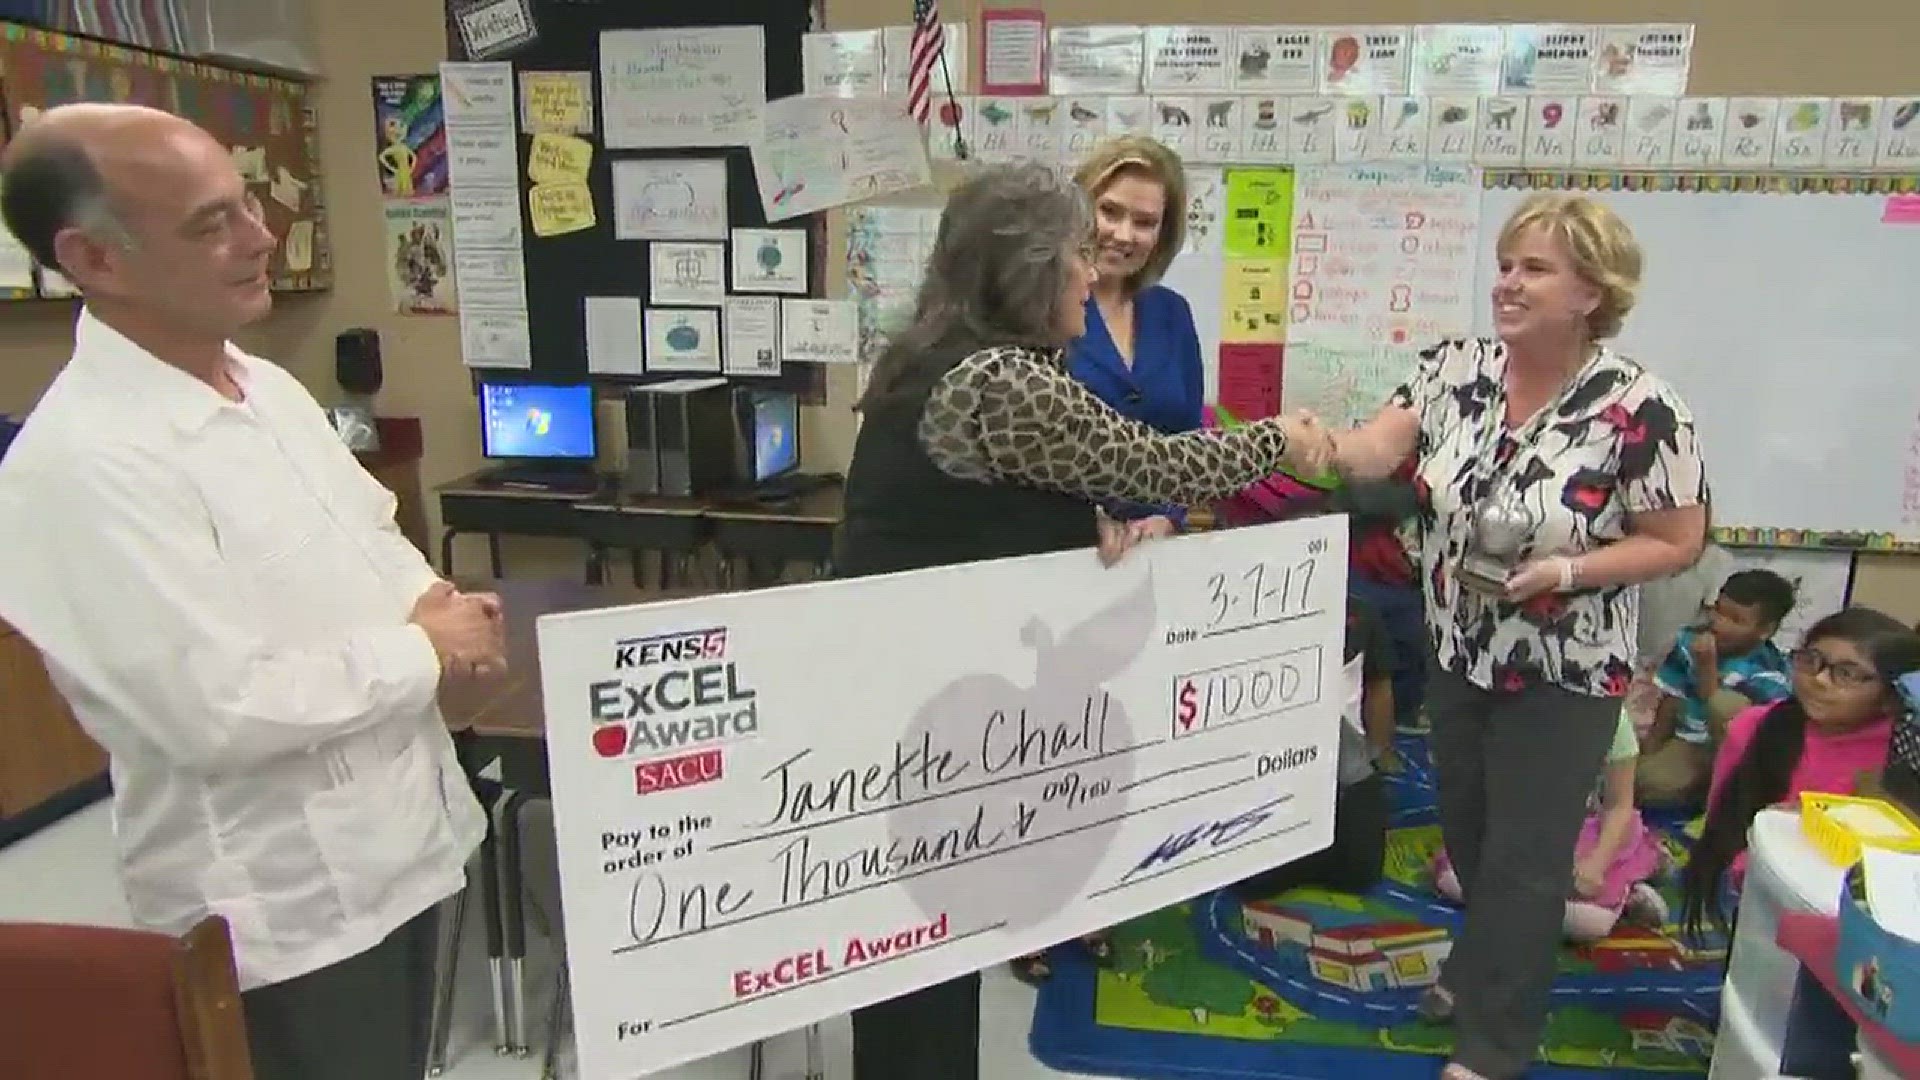 Janette Chall wins ExCEL Award for East Central ISD